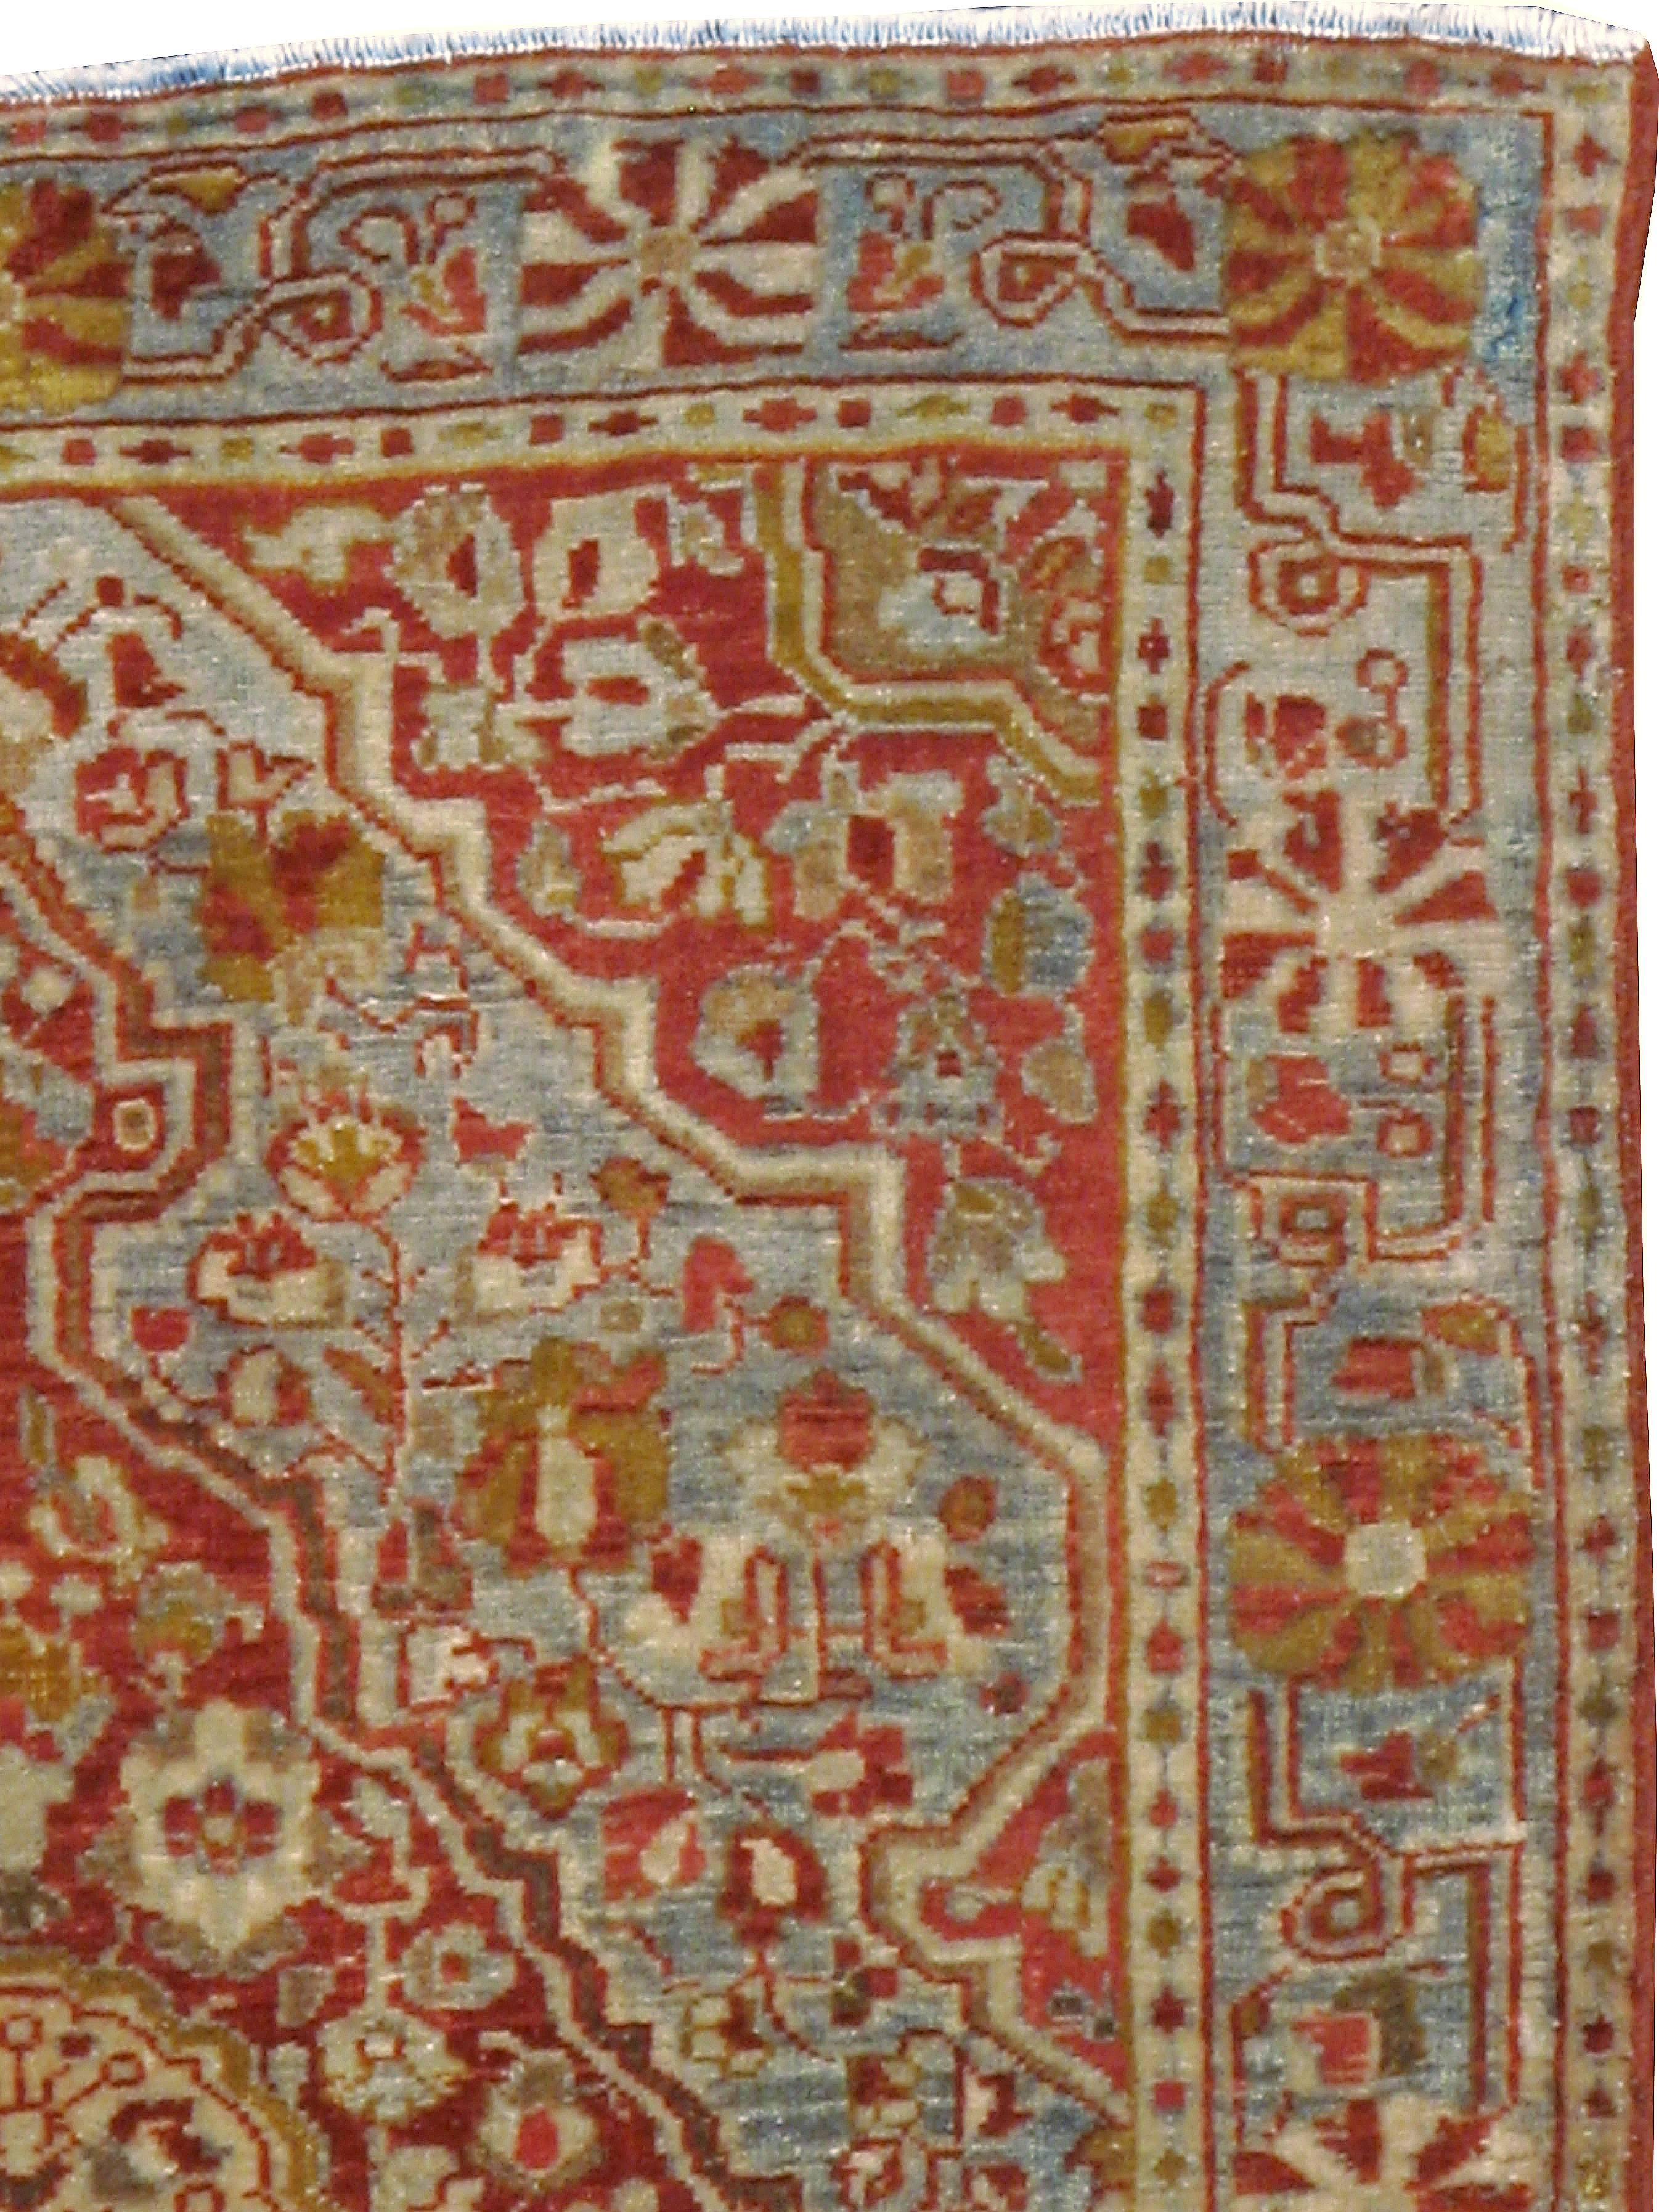 An antique Persian Sarouk Farahan carpet from the first quarter of the 20th century.